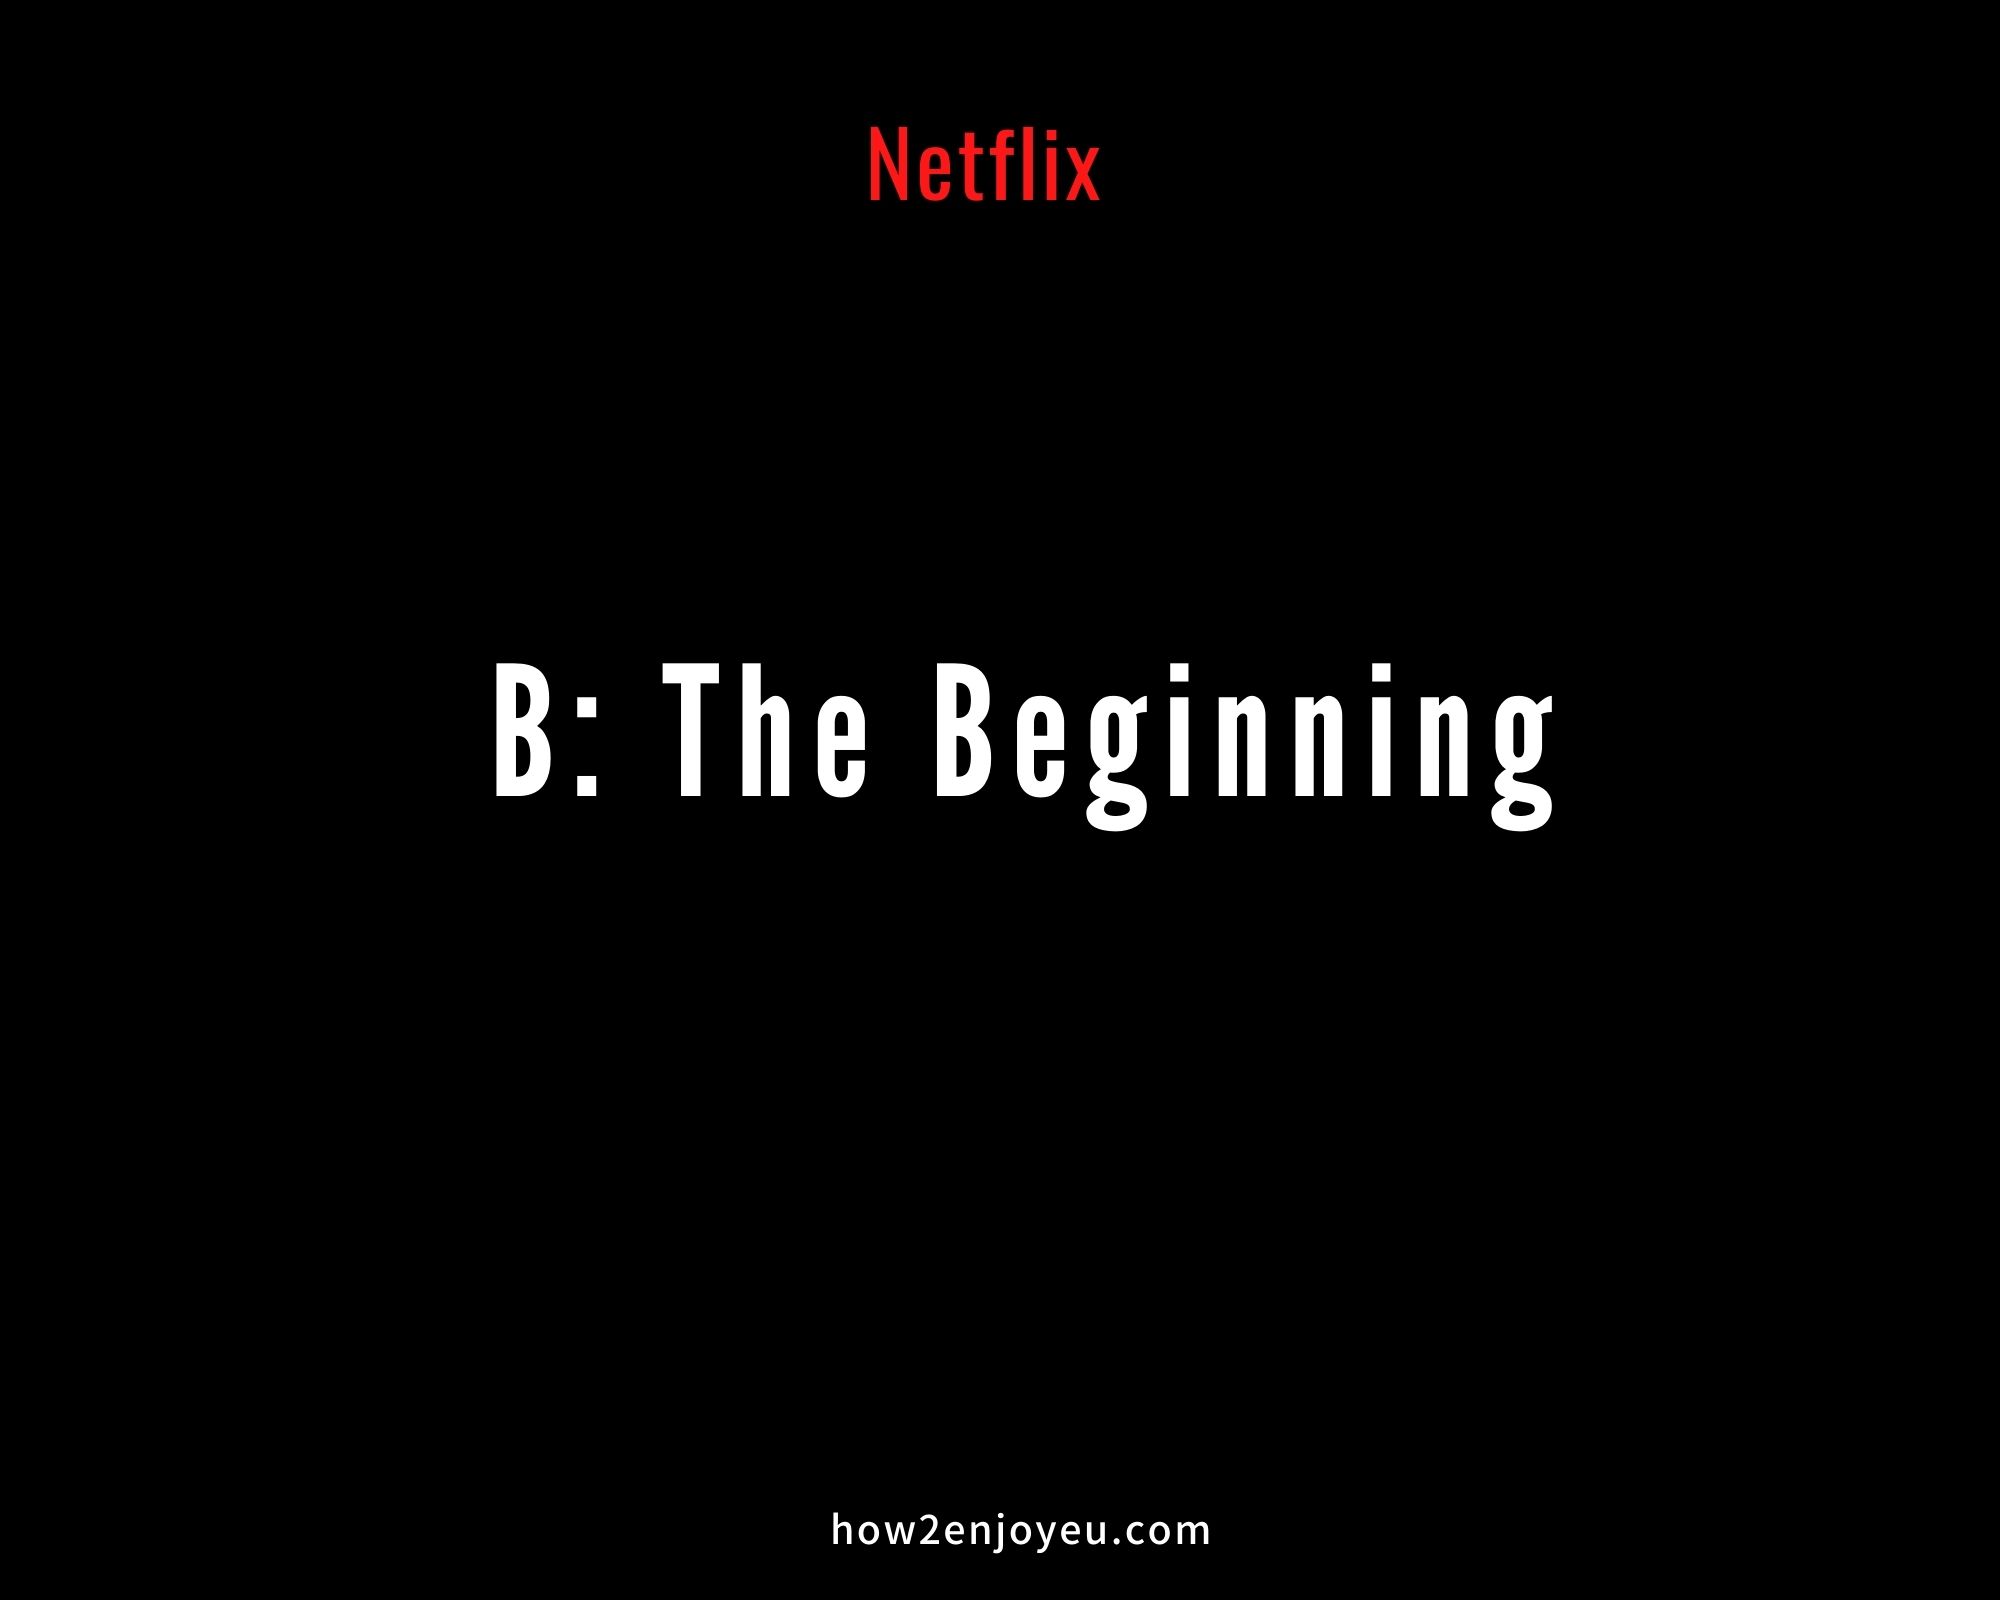 You are currently viewing ネットフリックス「B: The Beginning」 【ドイツで日本制作の作品だけをNetflixで観る1週間】